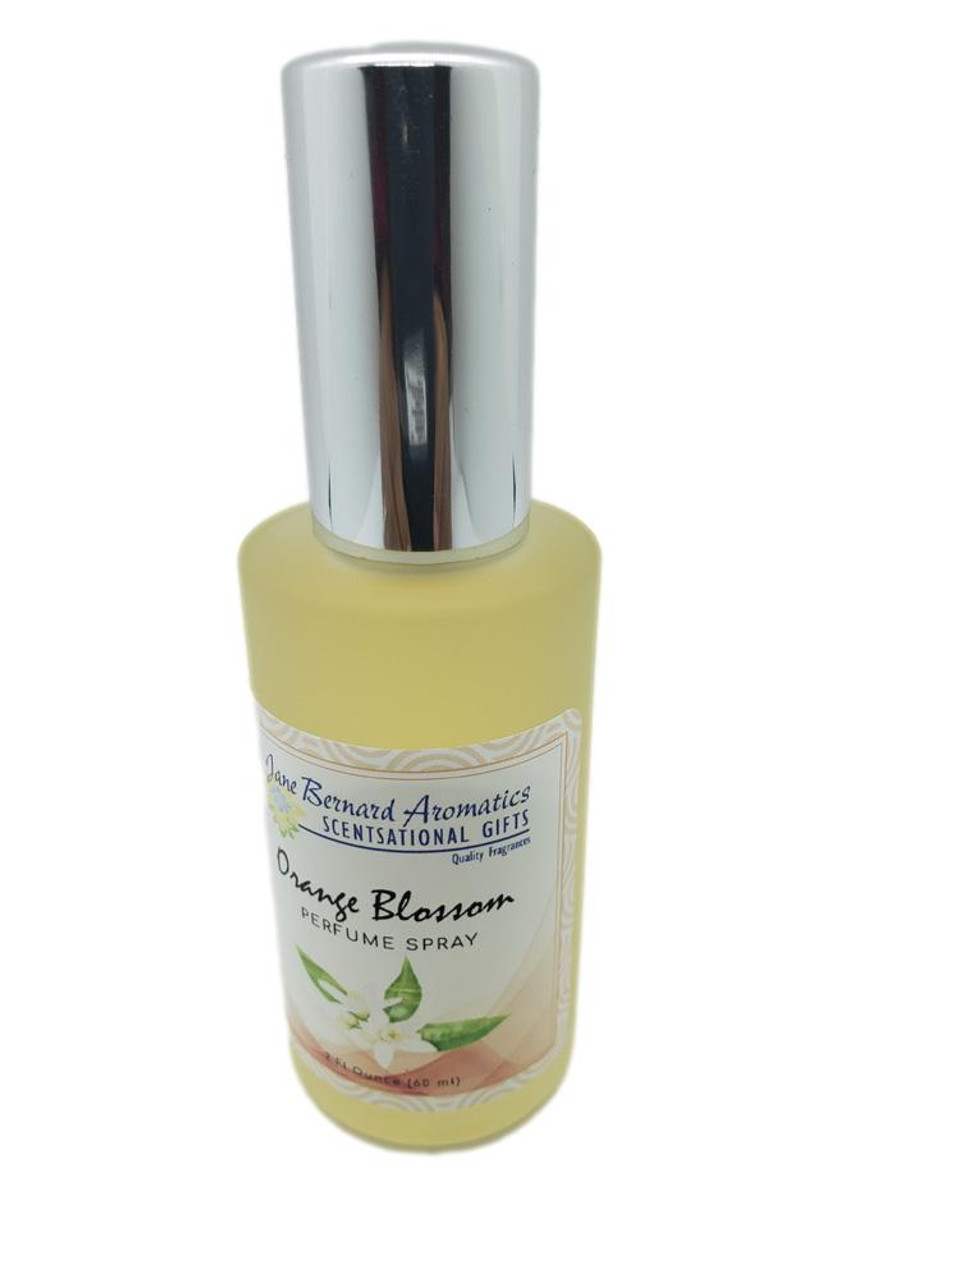 Fragrances & More - Orange Blossom Fragrance Oil for Candle Making 2 oz.  (60ml) Candle Scents for Candle Making. Scented Oil for Home. Essential  Oils